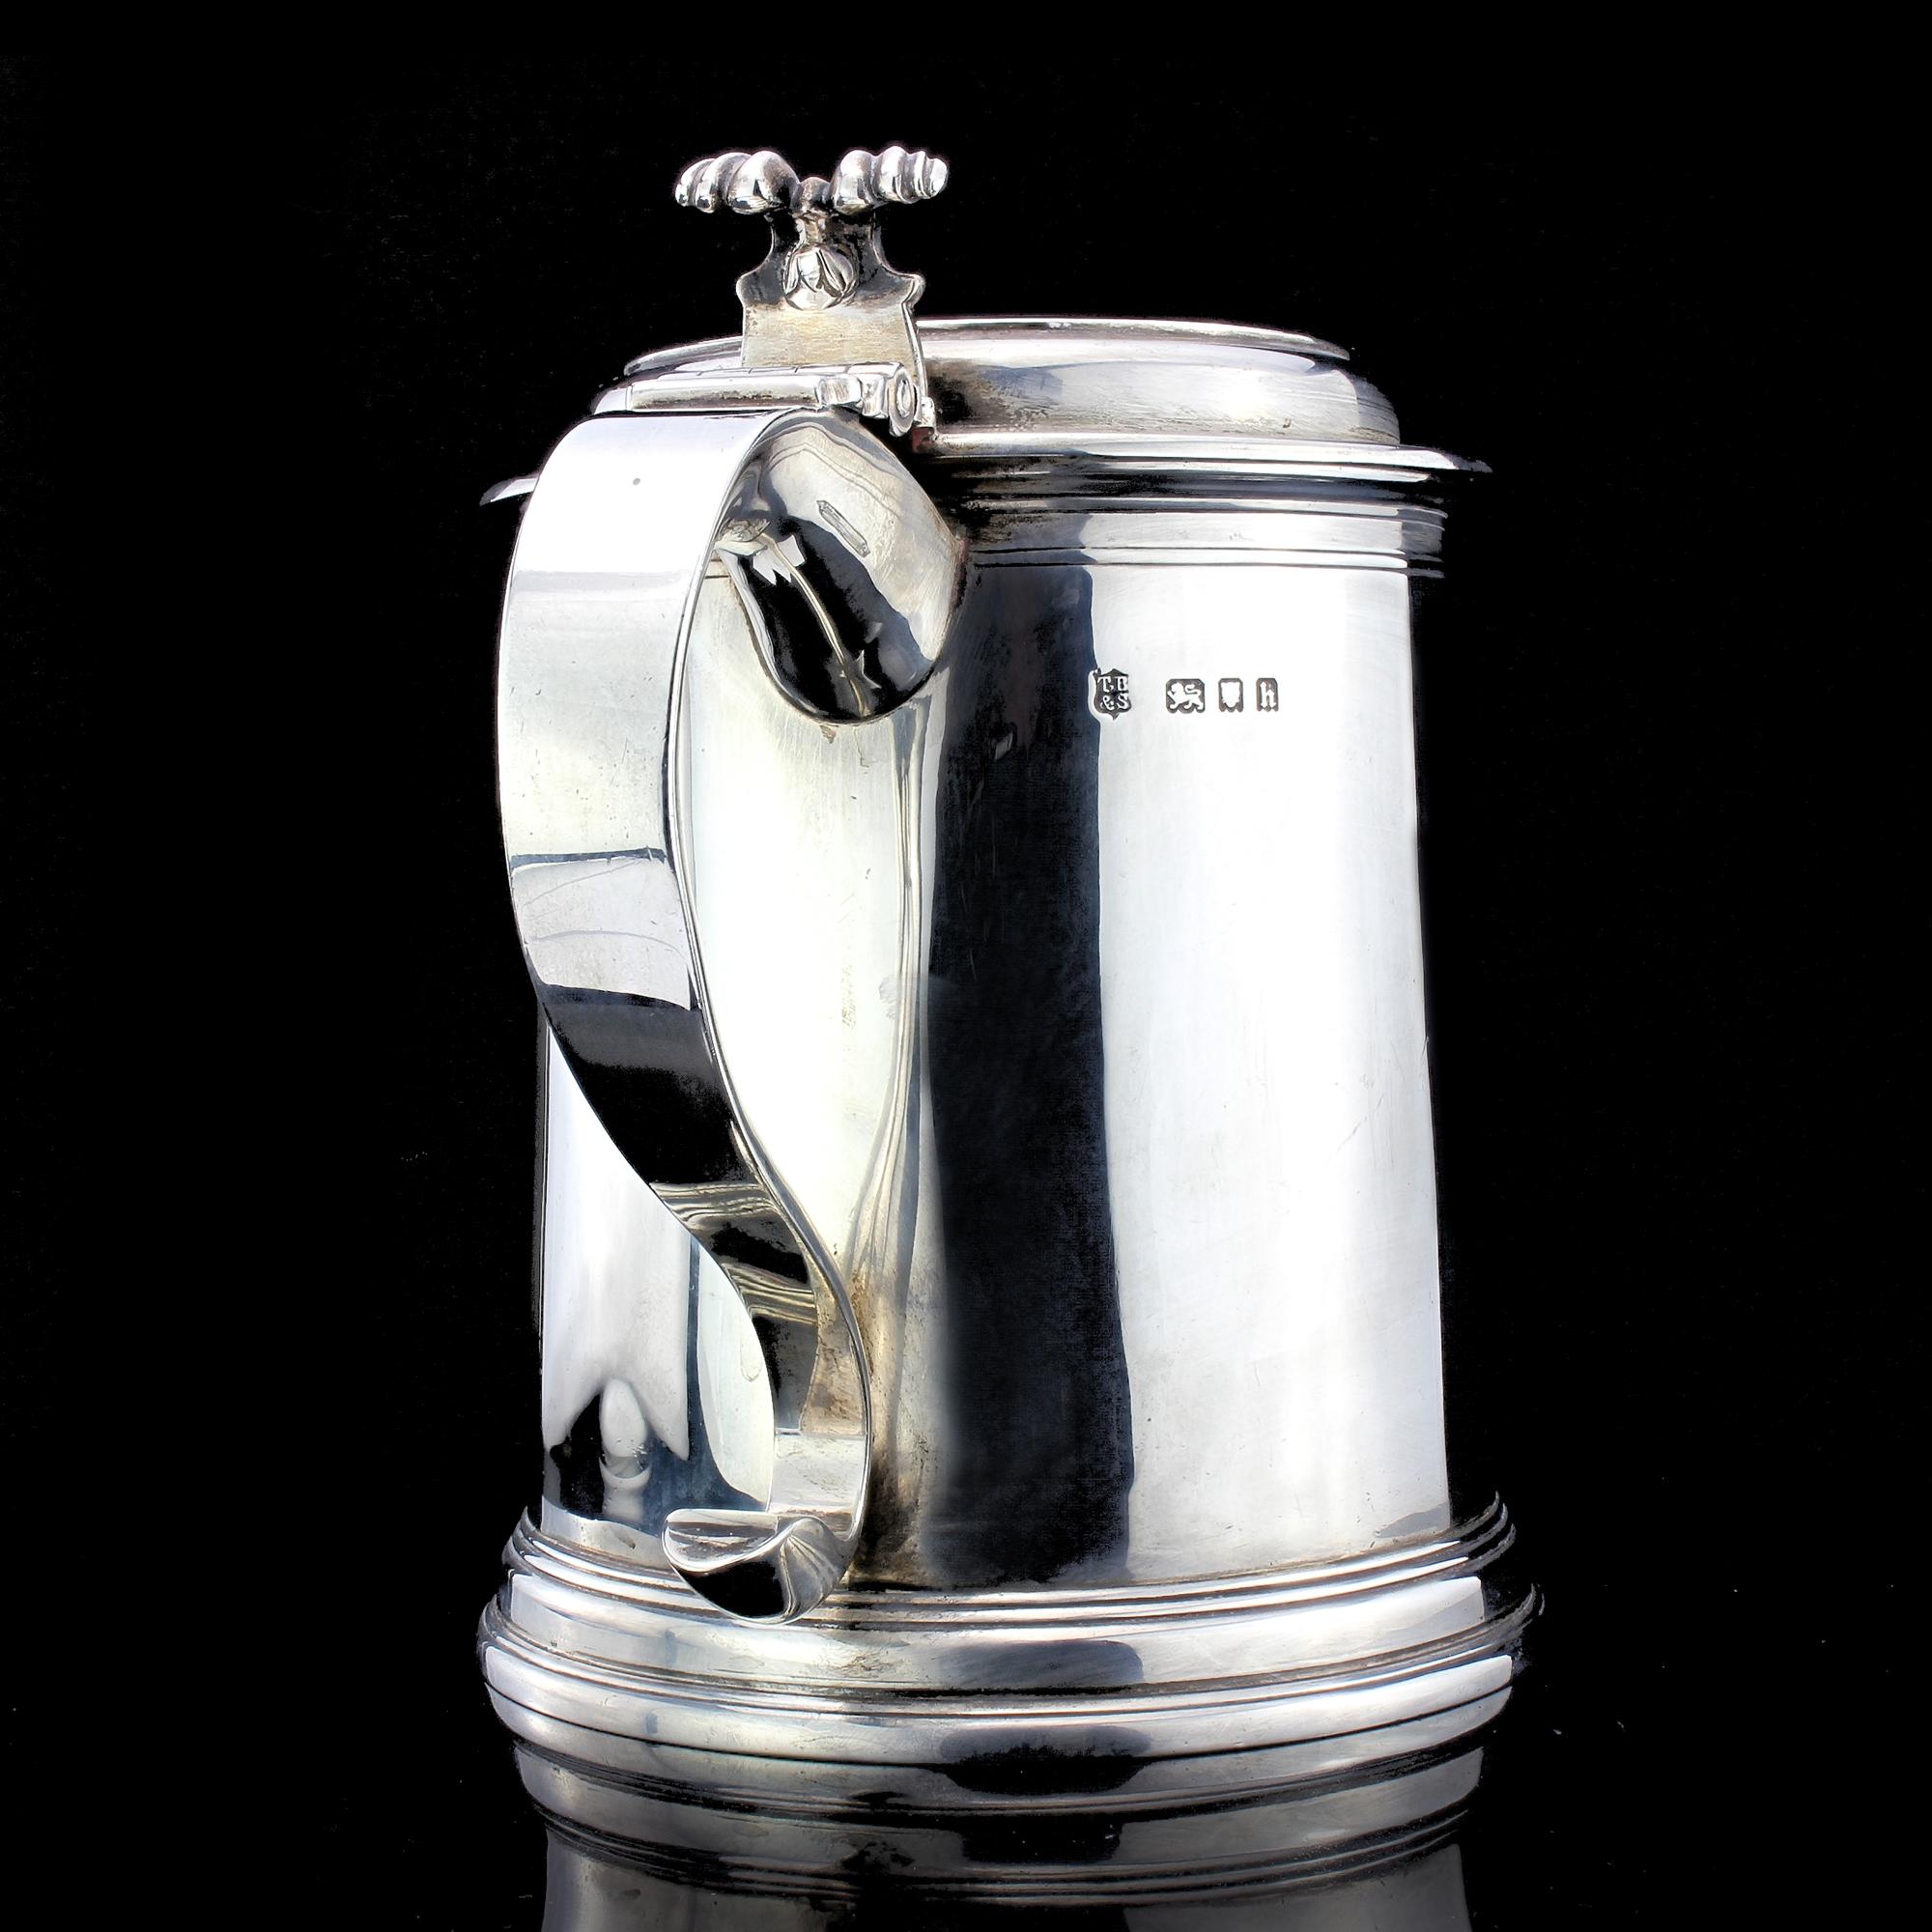 Antique heavy and large tankard.
Made by Thomas Bradbury & Sons
Made in London, 1903
Fully hallmarked

Has engraving on the base, which shows this was a trophy for a winner of golf competition.

Dimensions:
Length 19.5 cm
Width 13.2